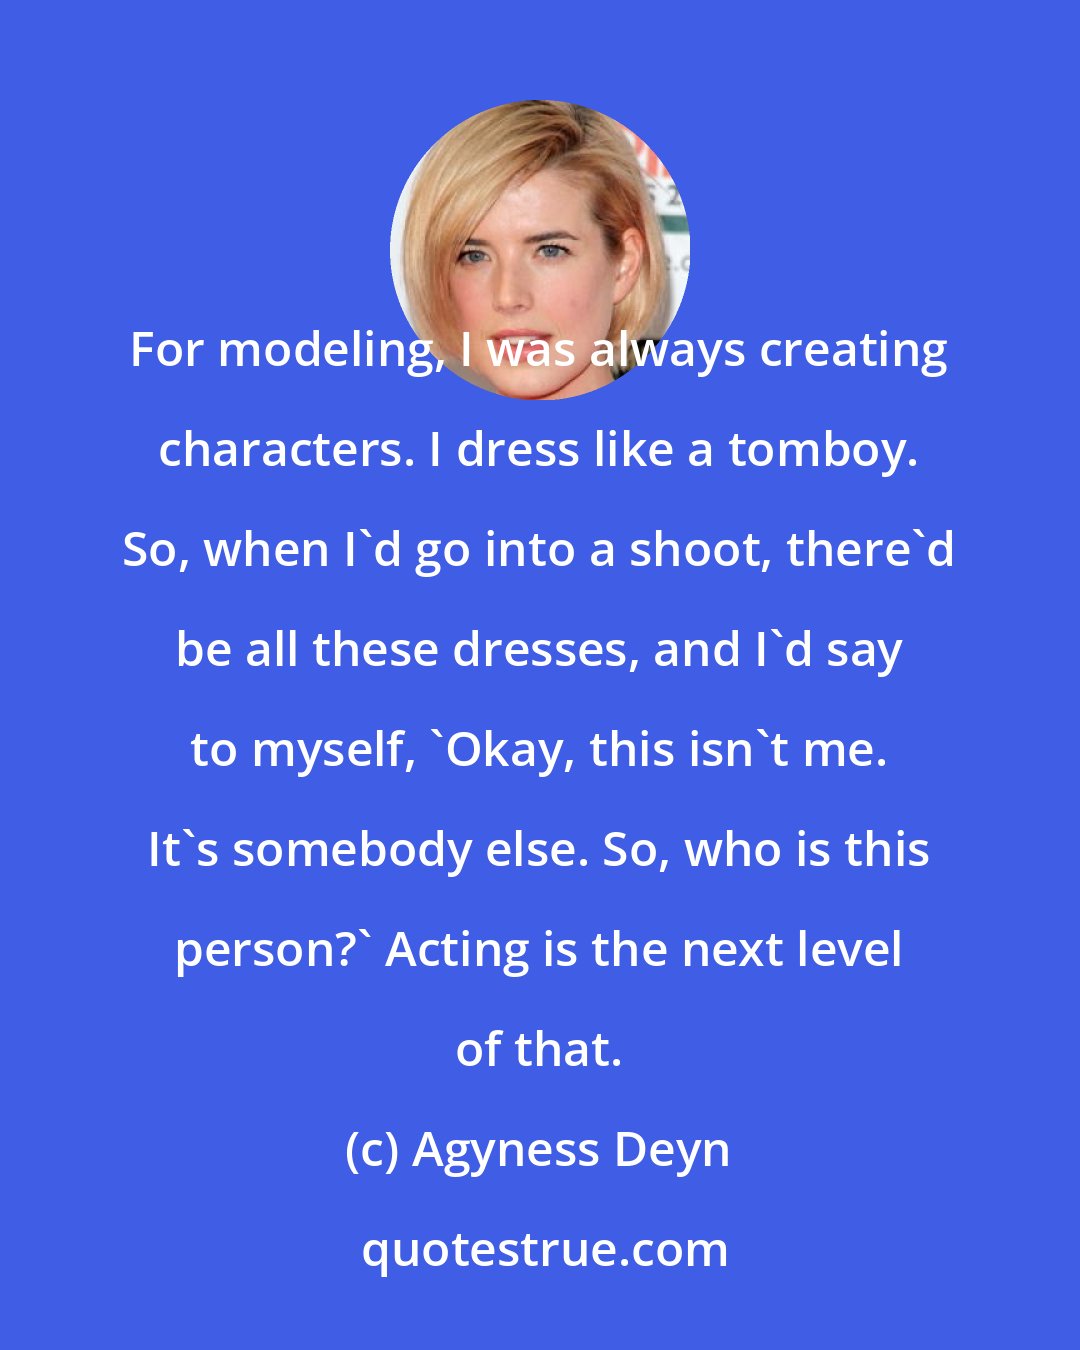 Agyness Deyn: For modeling, I was always creating characters. I dress like a tomboy. So, when I'd go into a shoot, there'd be all these dresses, and I'd say to myself, 'Okay, this isn't me. It's somebody else. So, who is this person?' Acting is the next level of that.